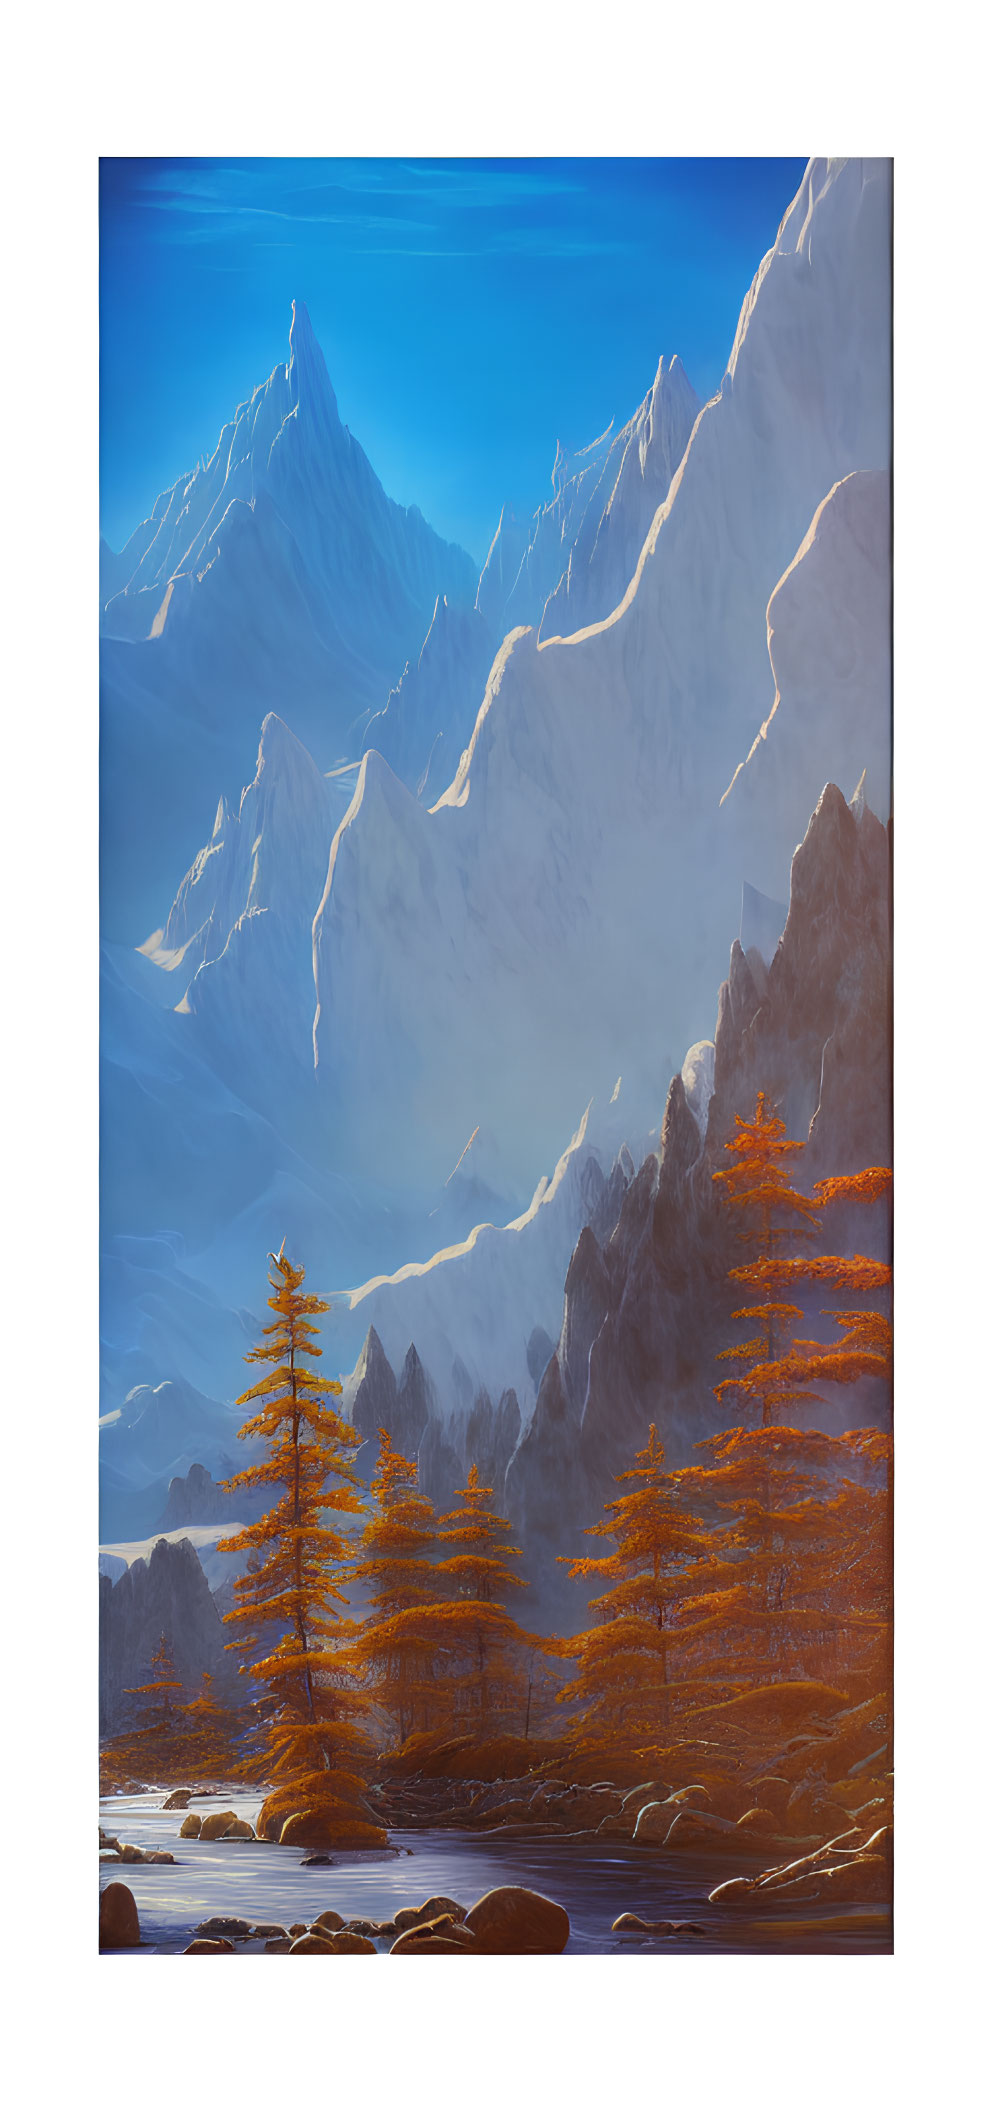 Snowy mountains and golden larch trees in serene landscape